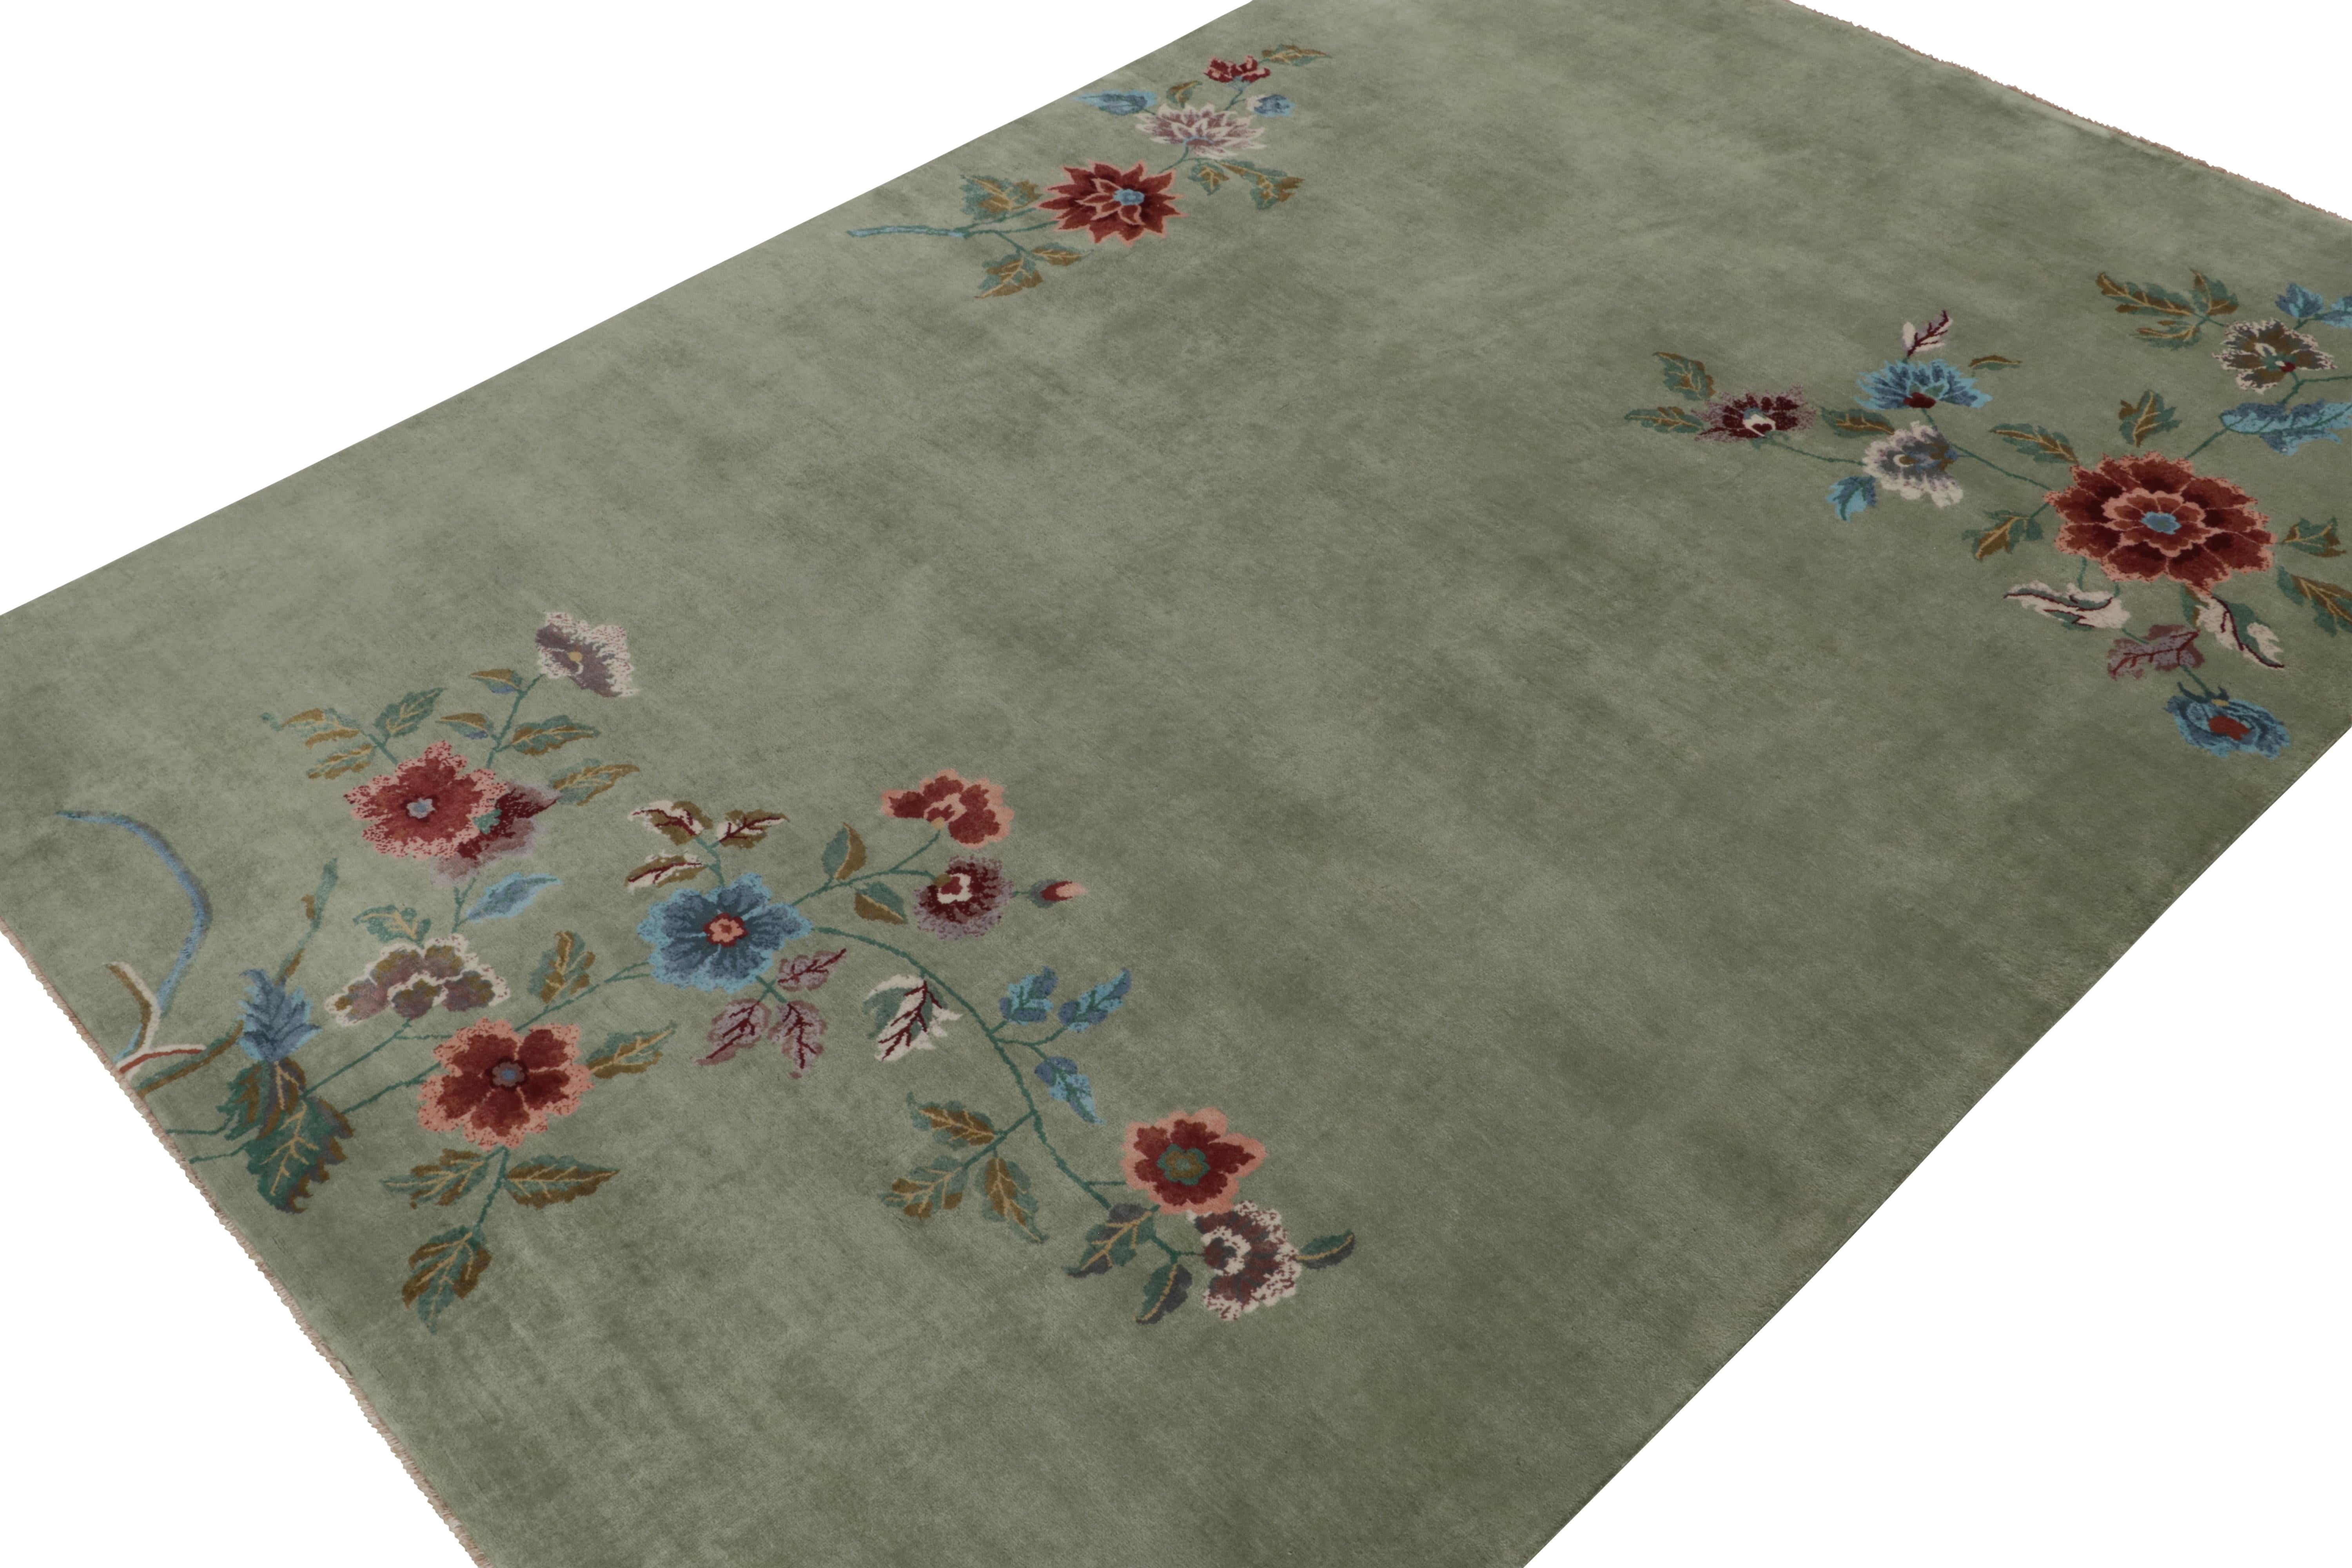 This 10x14 ode to Chinese Art Deco rugs is the next new addition to Rug & Kilim's inspired Deco Collection. Hand-knotted in wool & cotton.

Further on the Design:

The gorgeous piece enjoys whimsical florals in jewels tones of red and blue, and a